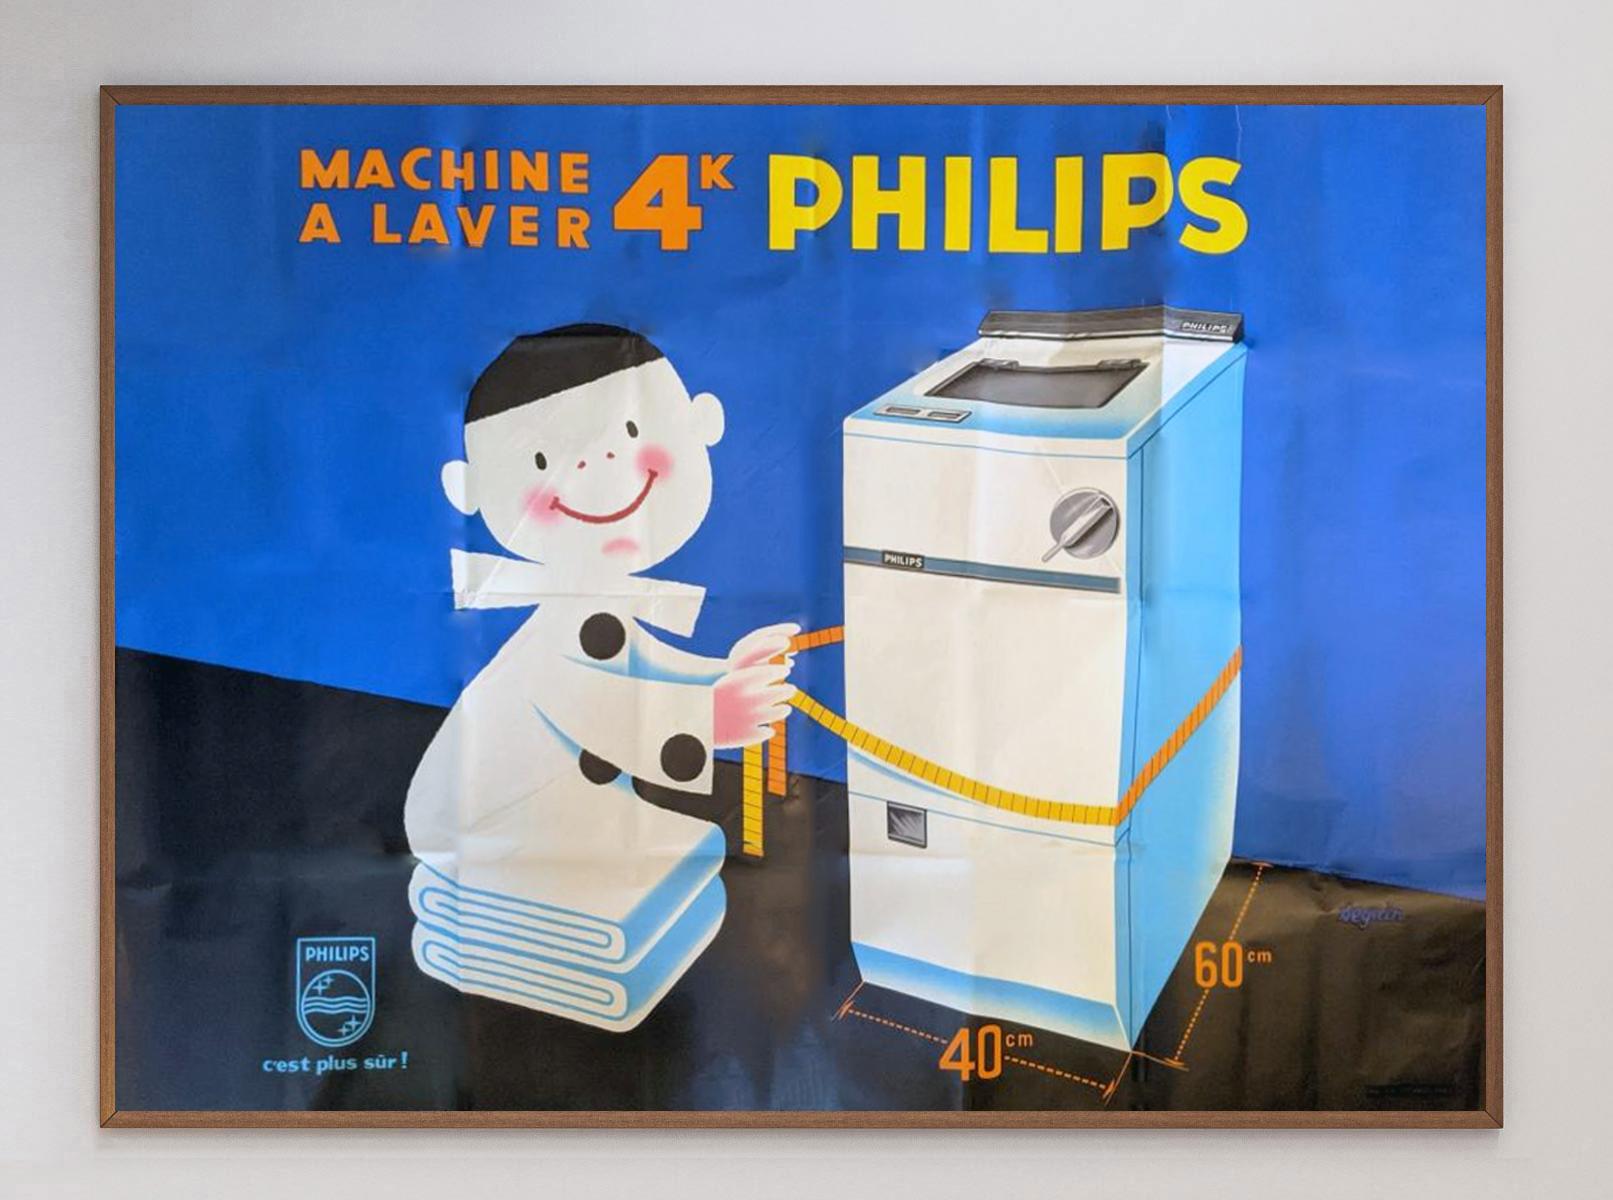 Wonderful & charming poster for Dutch electronics brand Philips. Founded in 1891, Philips was one of the biggest electronics brands in the UK and continues to trade today, focusing on health technology.

With artwork from Seguin, this beautiful